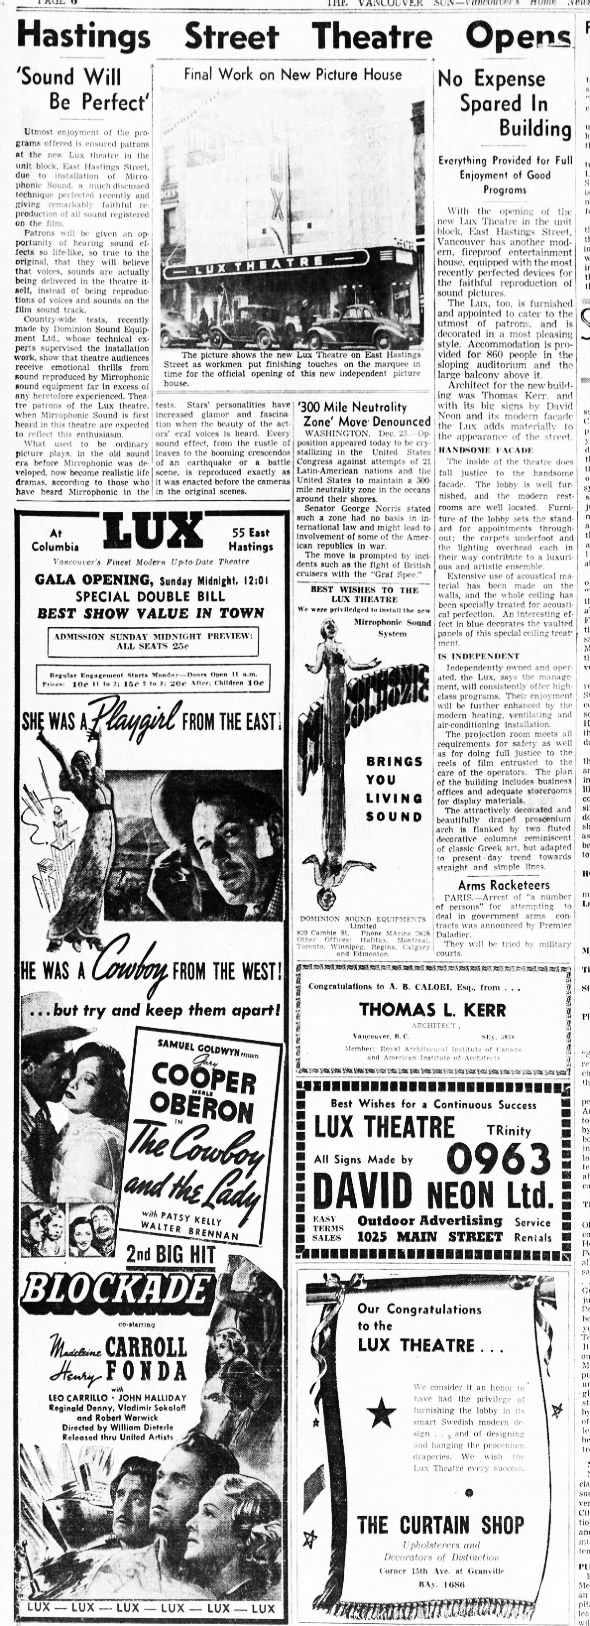 Lux theatre opening